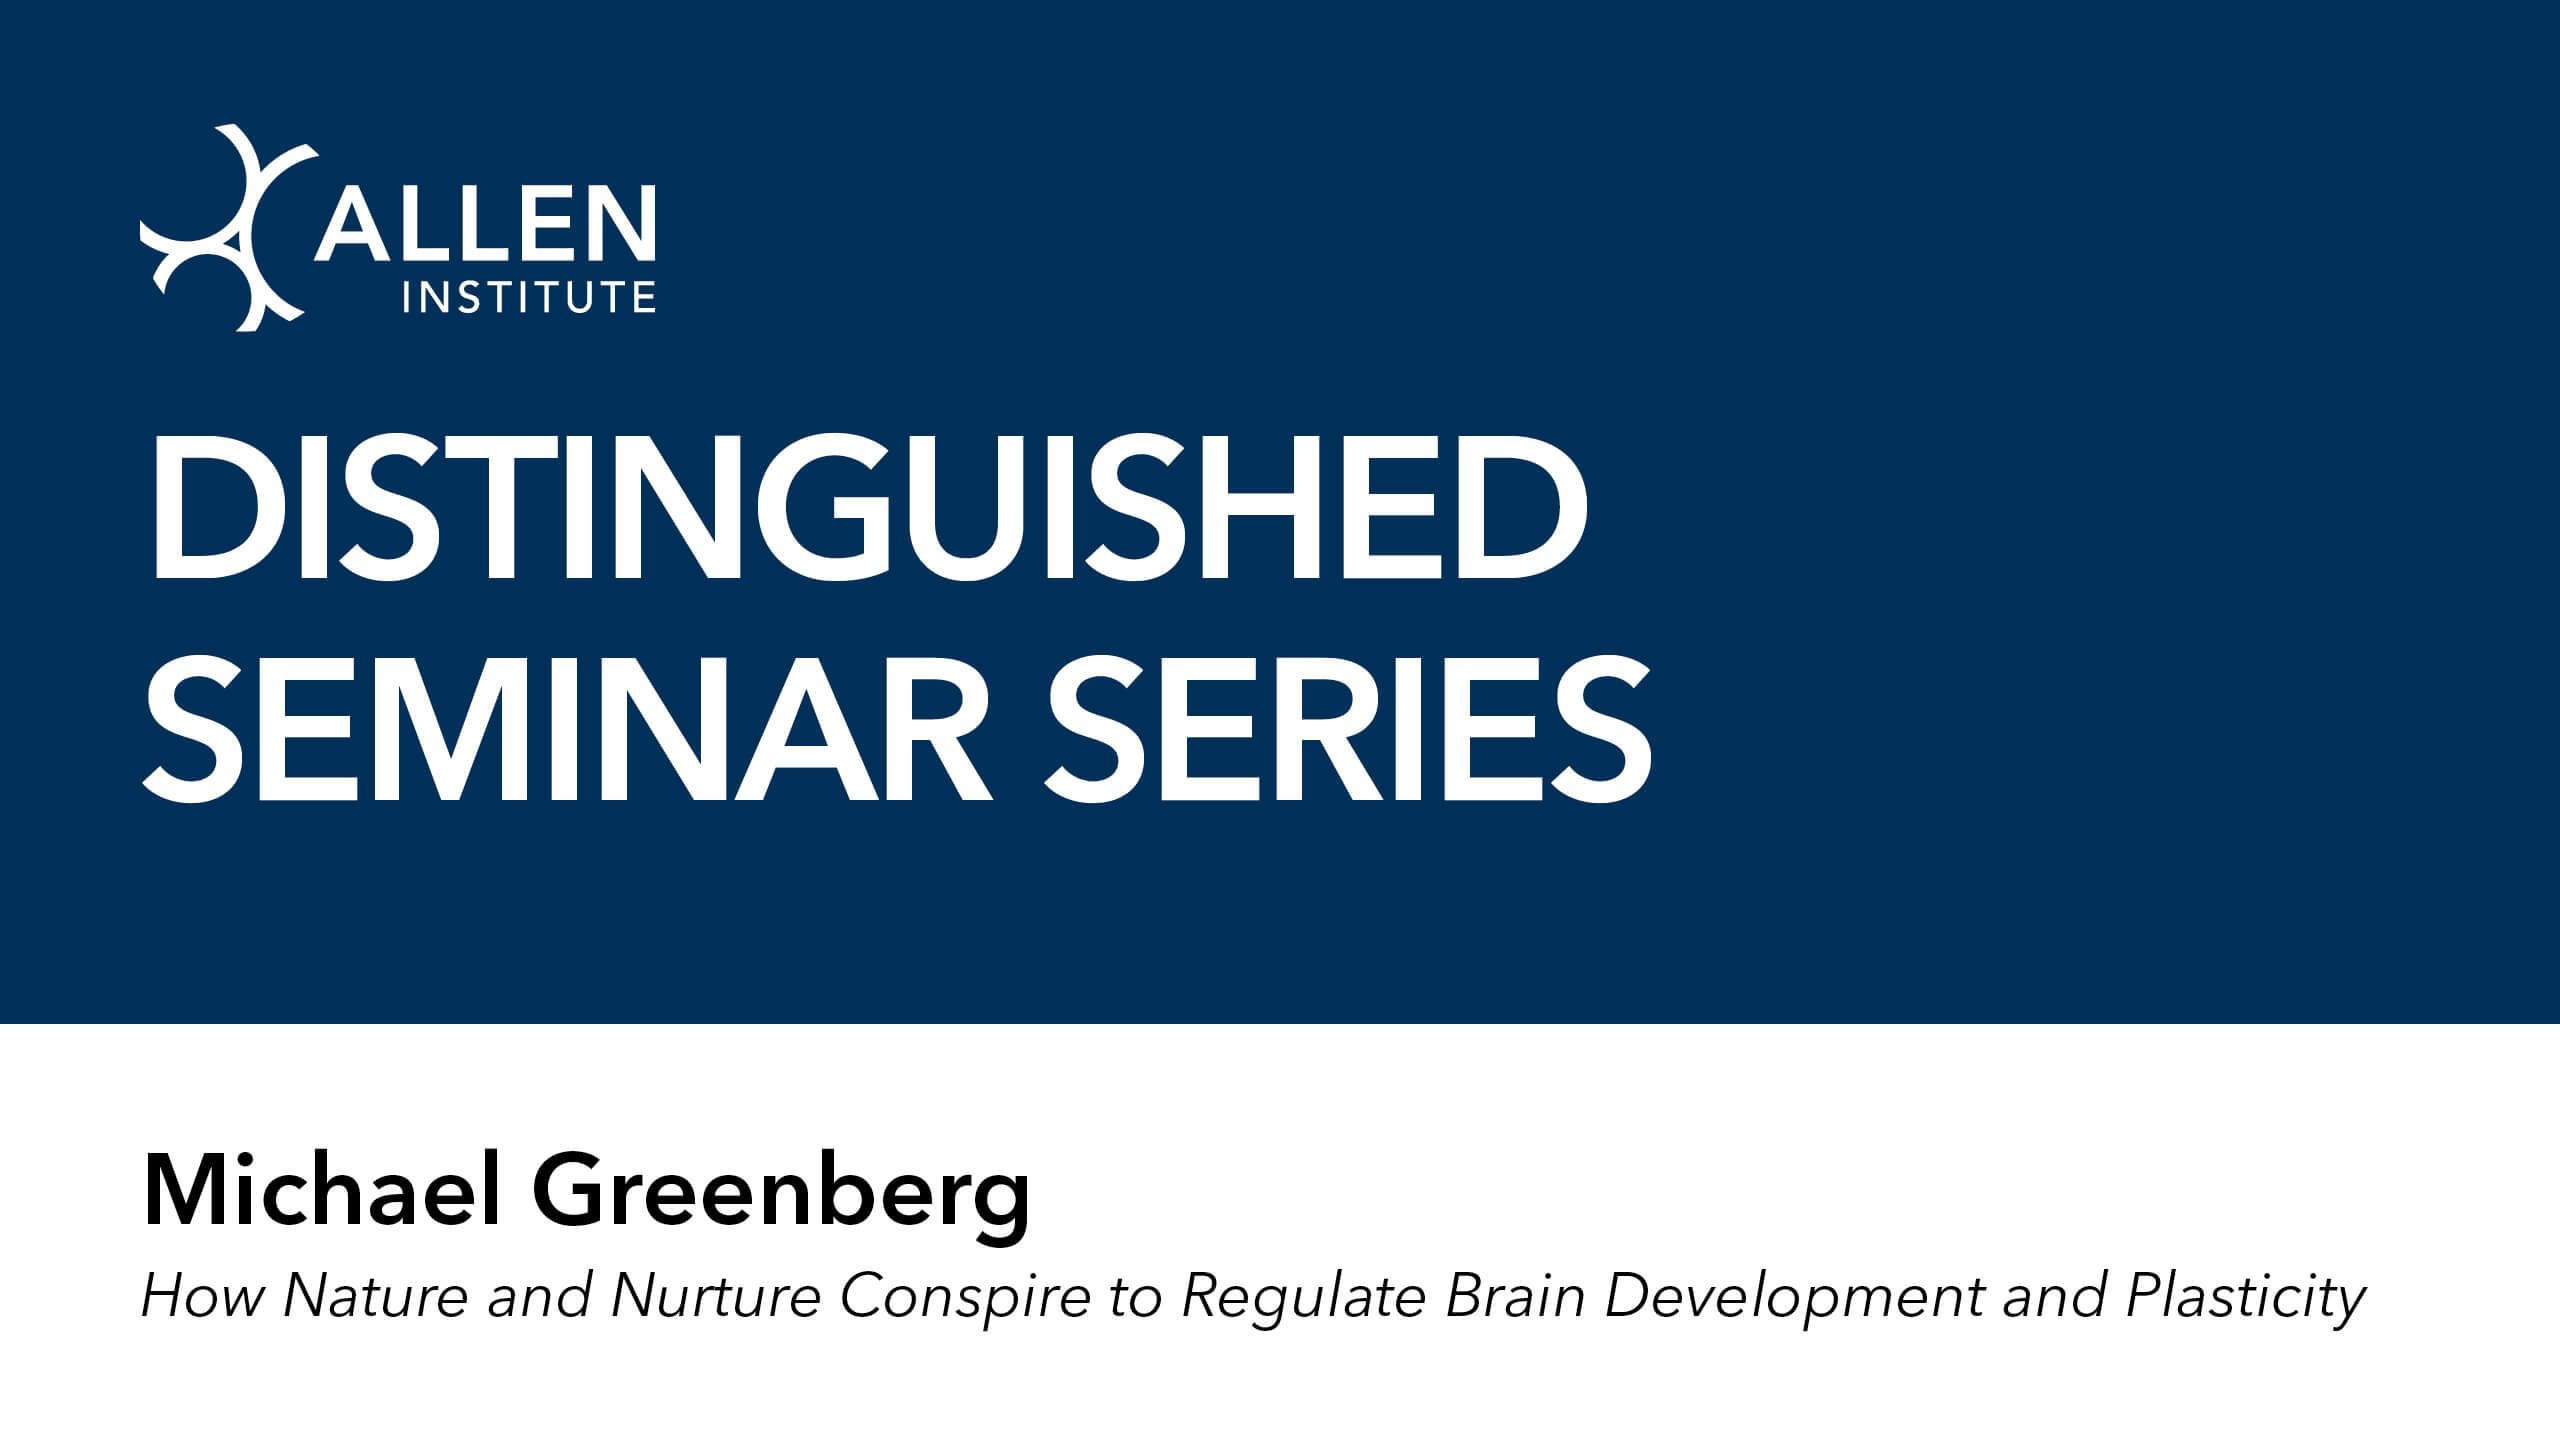 Text on a graphic that says "Distinguished Seminar Series" "Michael Greenberg: How Nature and Nurture Conspire to Regulate Brain Development and Plasticity"